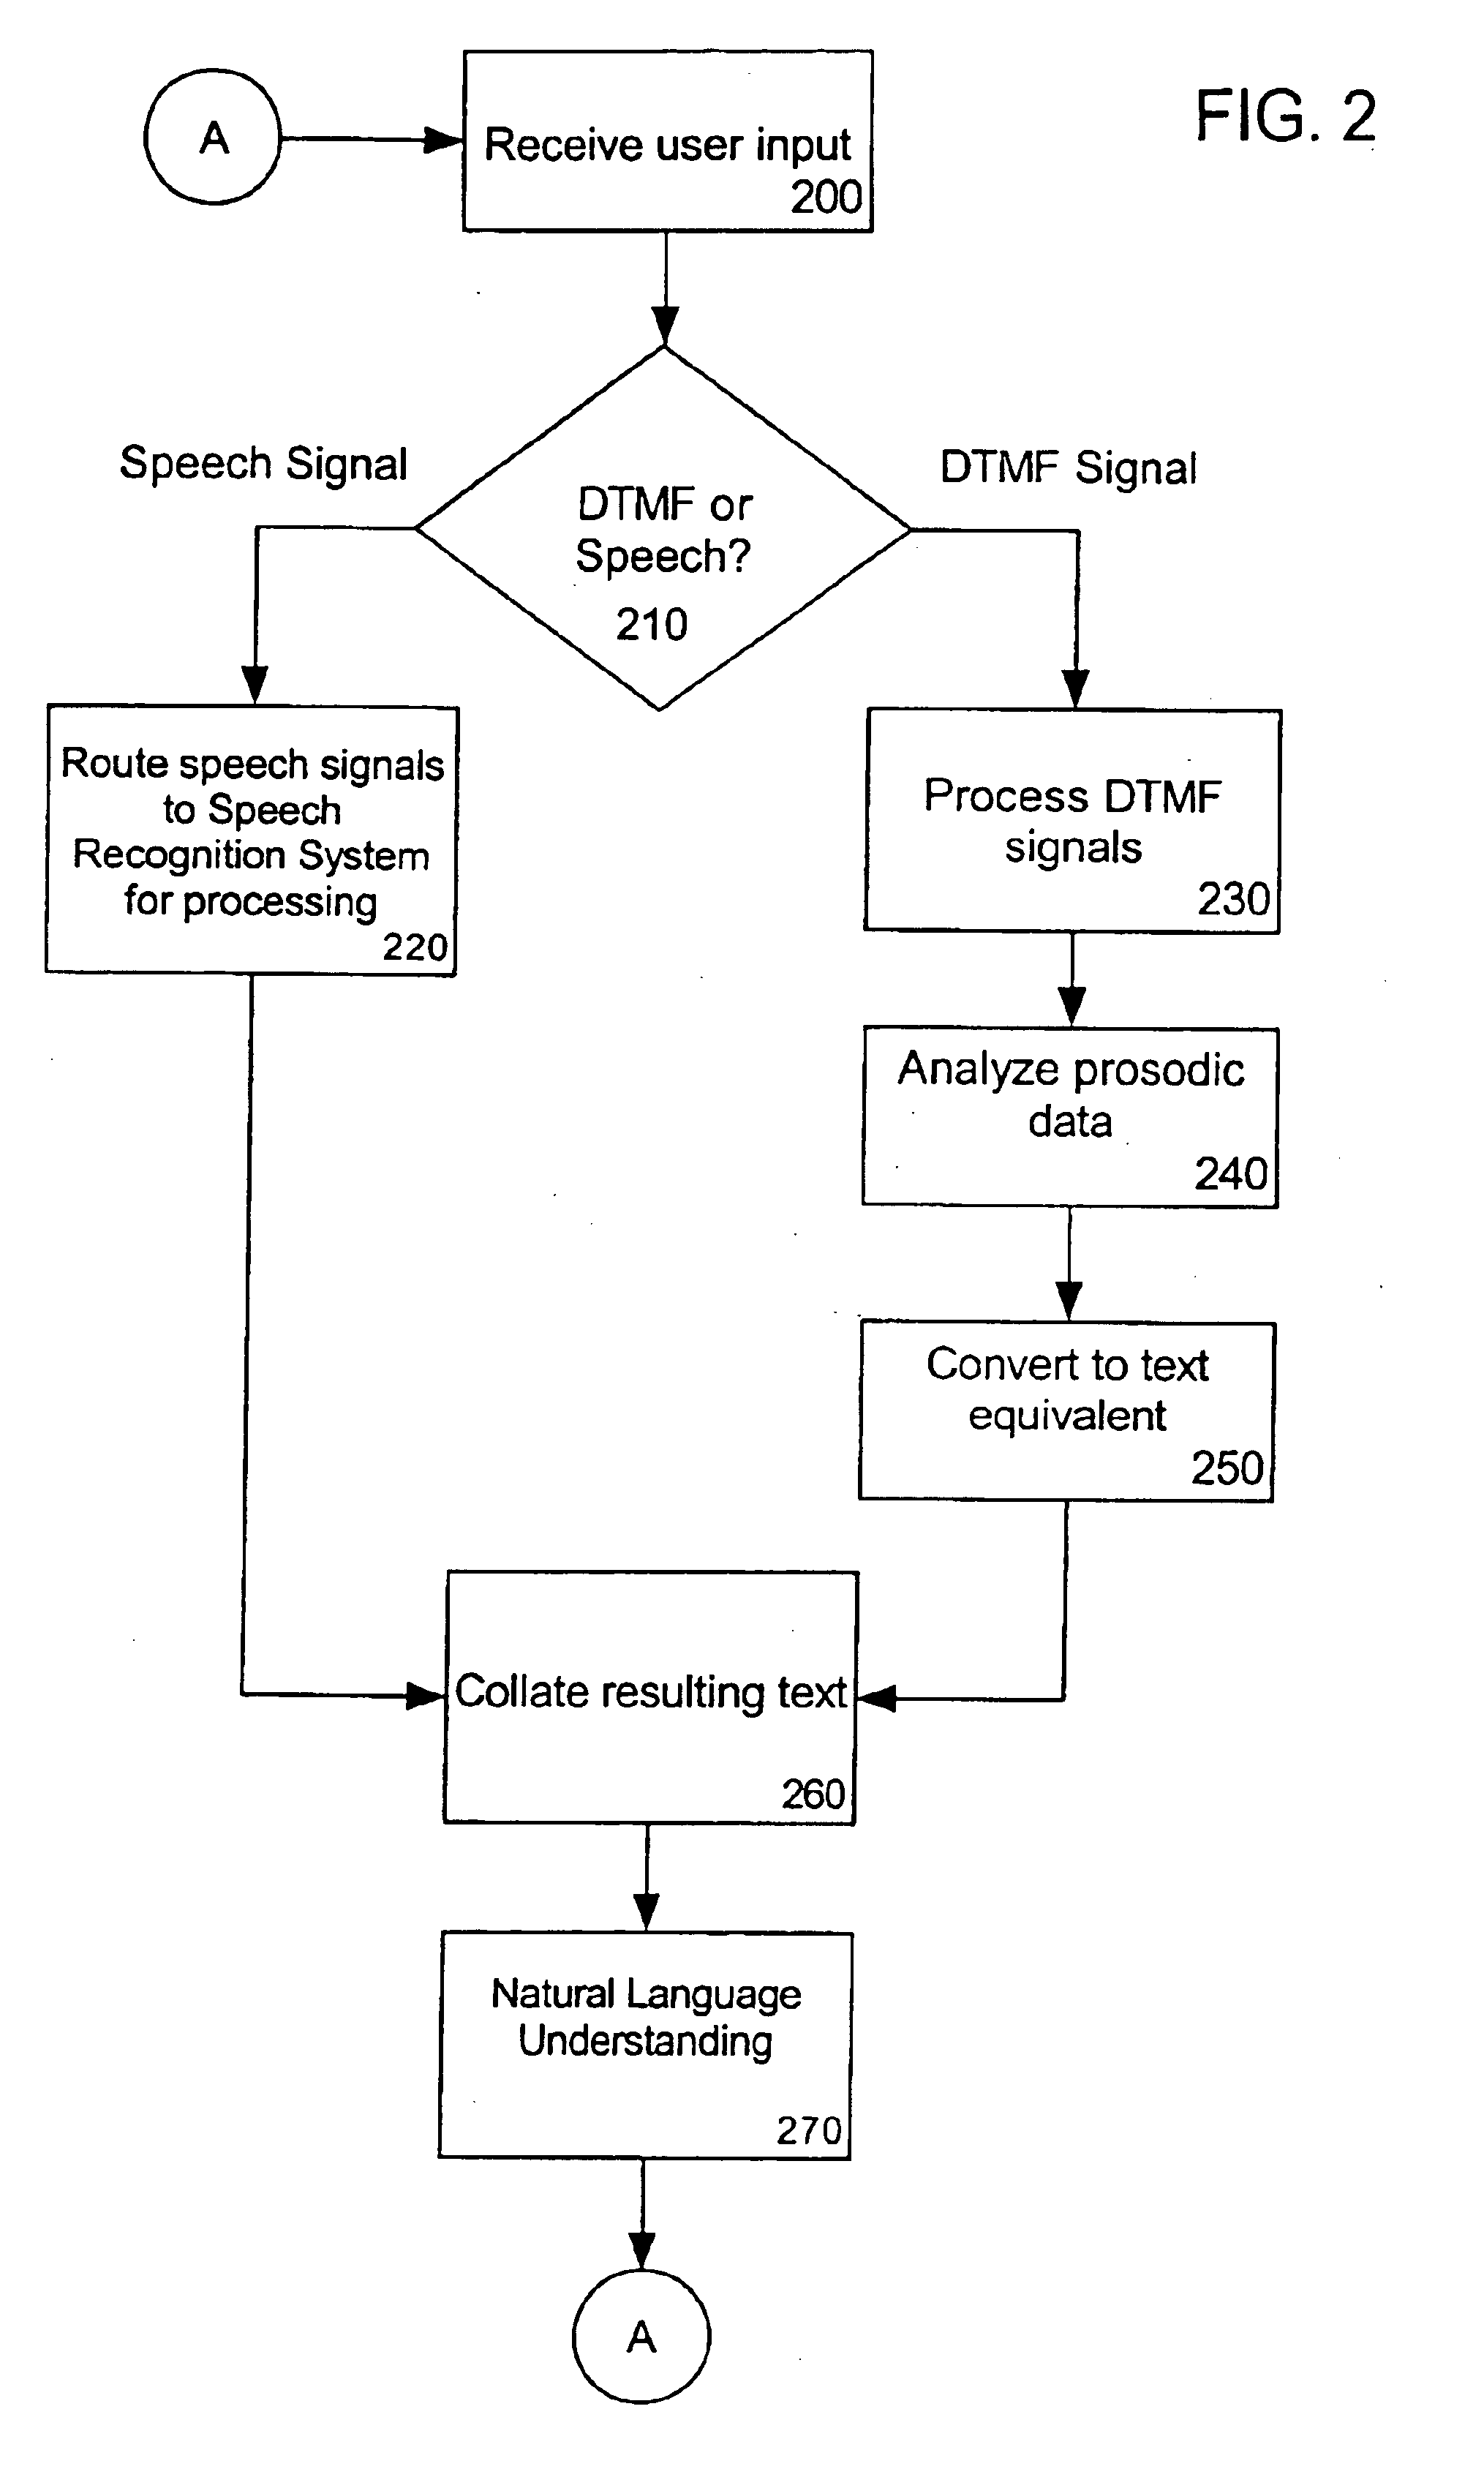 Processing dual tone multi-frequency signals for use with a natural language understanding system